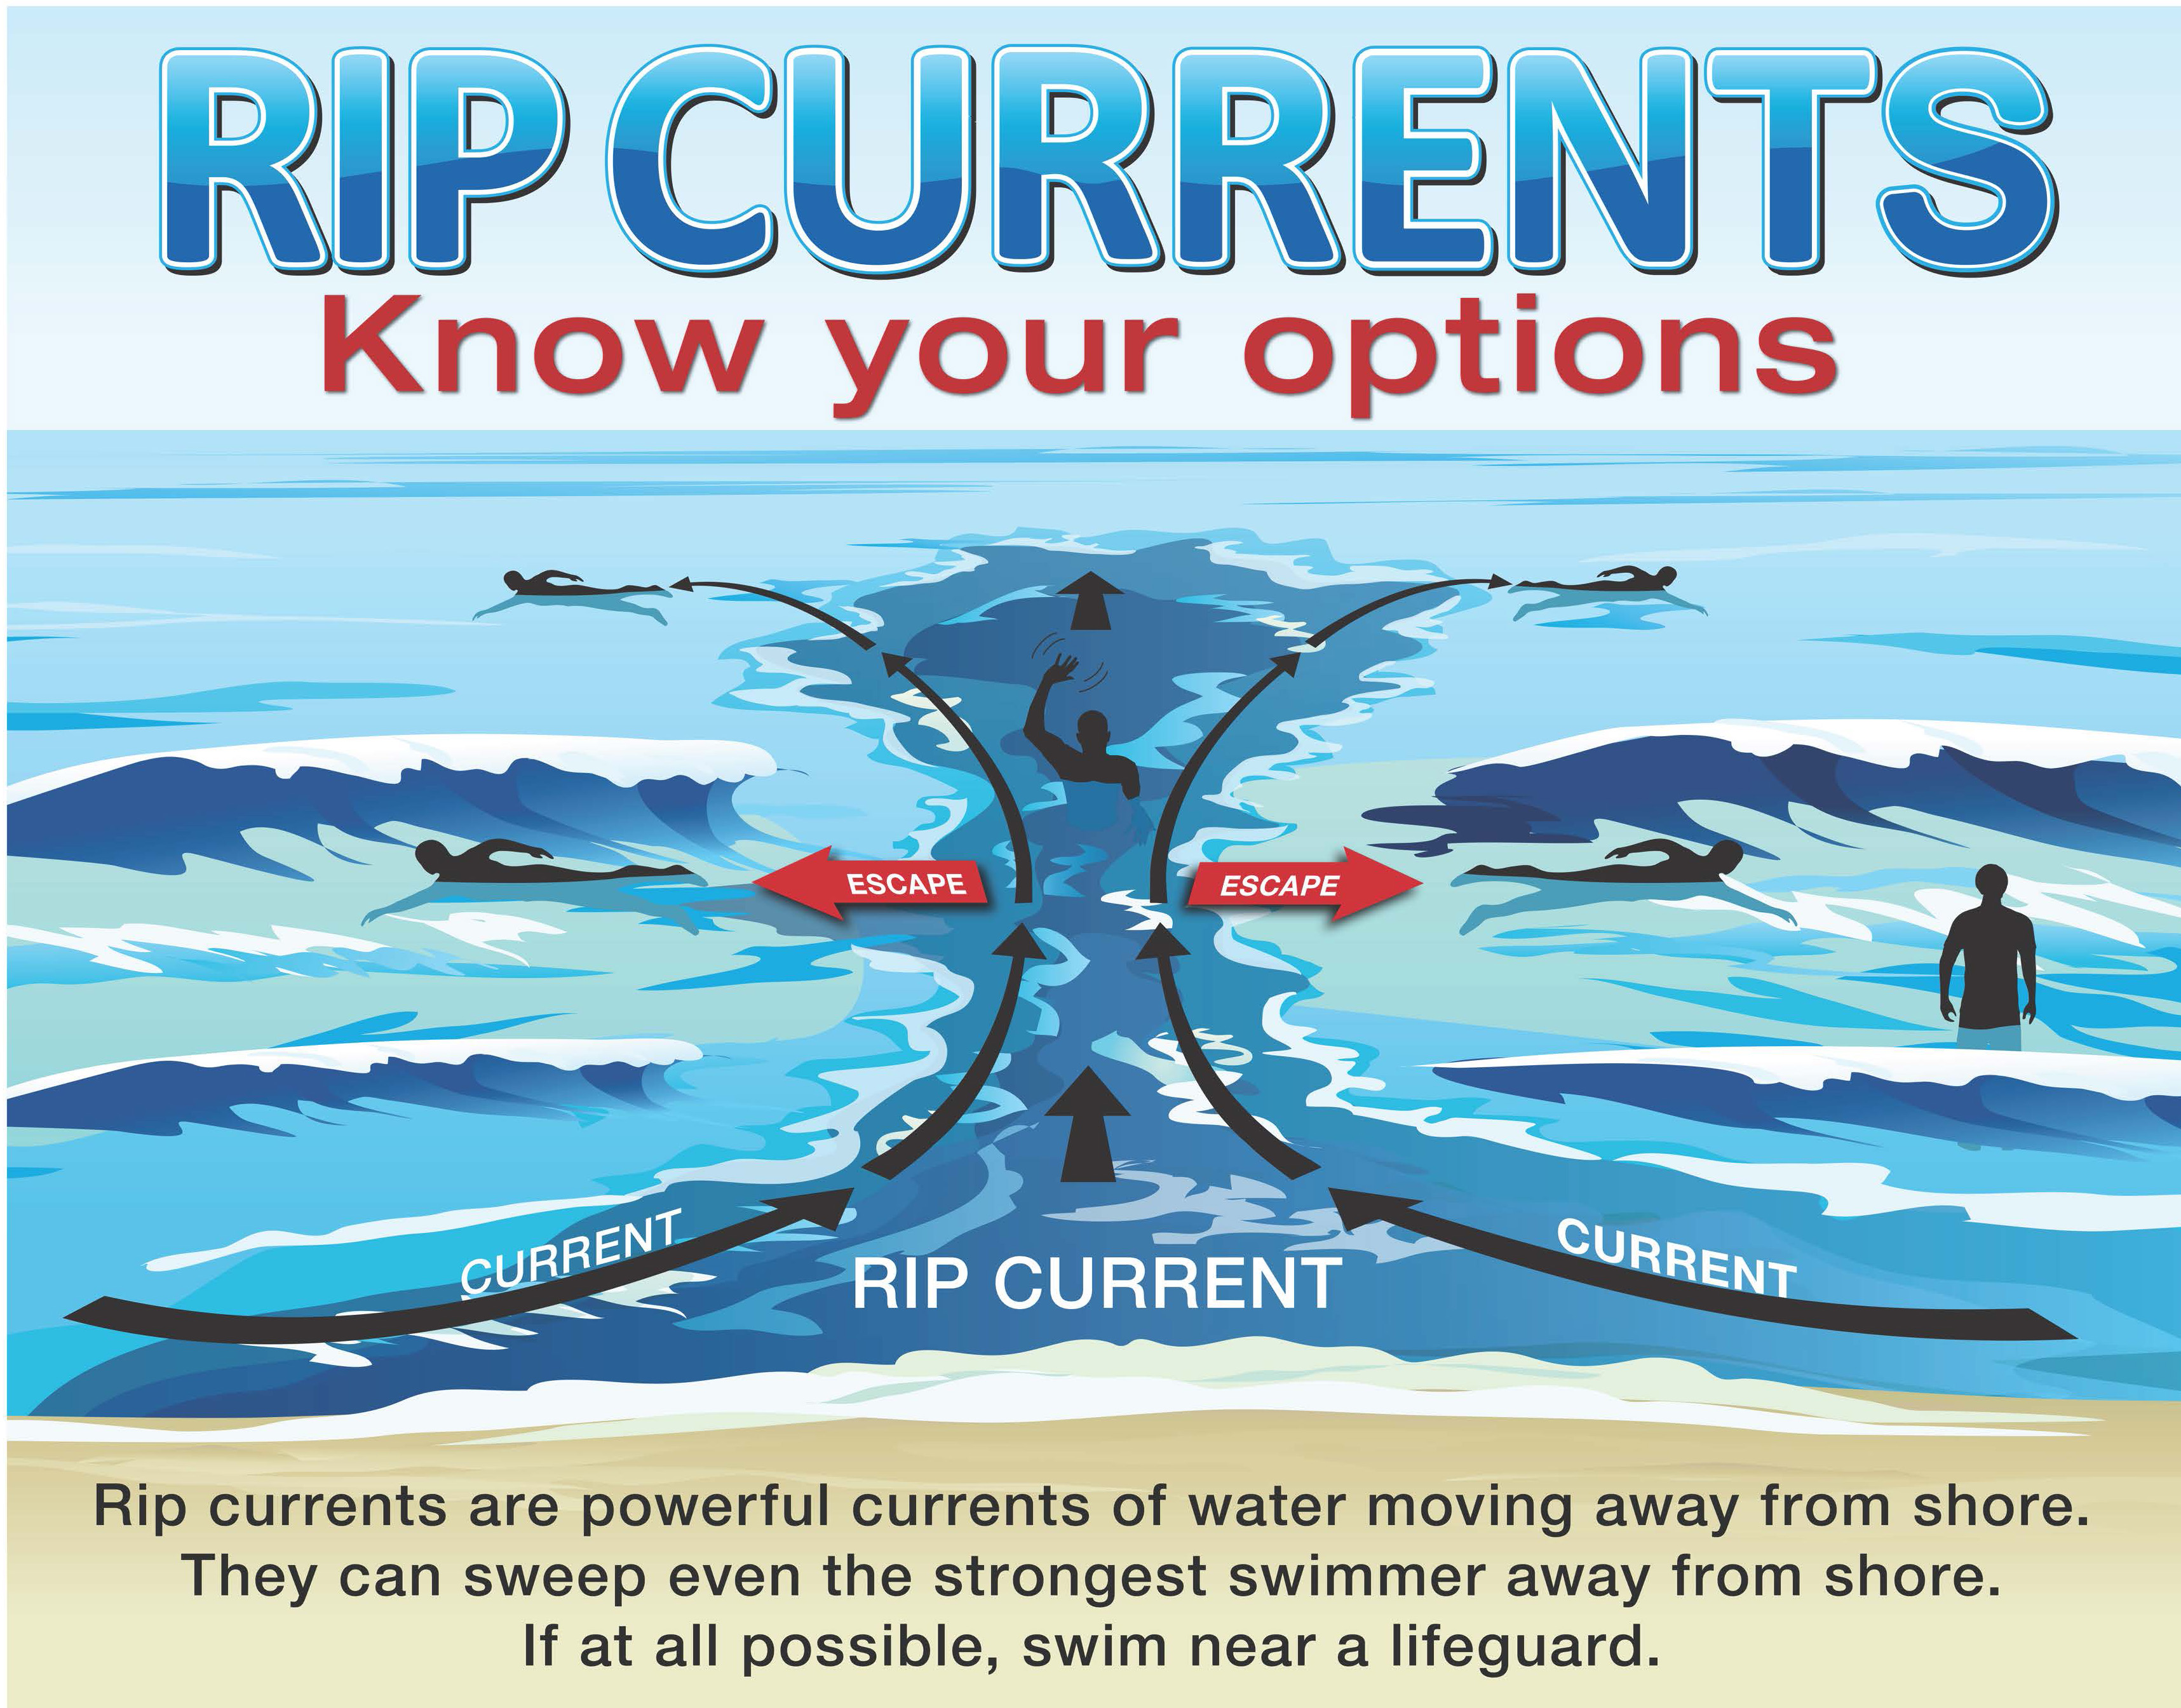 rip current safety graphic: Relax, rip currents don't pull  you u nder. Don't swim against the current. Swim sideways out of the current, then to shore. If you can't eswcape, float or tread water and wave or yeall for help. Rip c urrents can sweep even powerful swinneraway from shore., If at all possible, swim near a lifeguard.